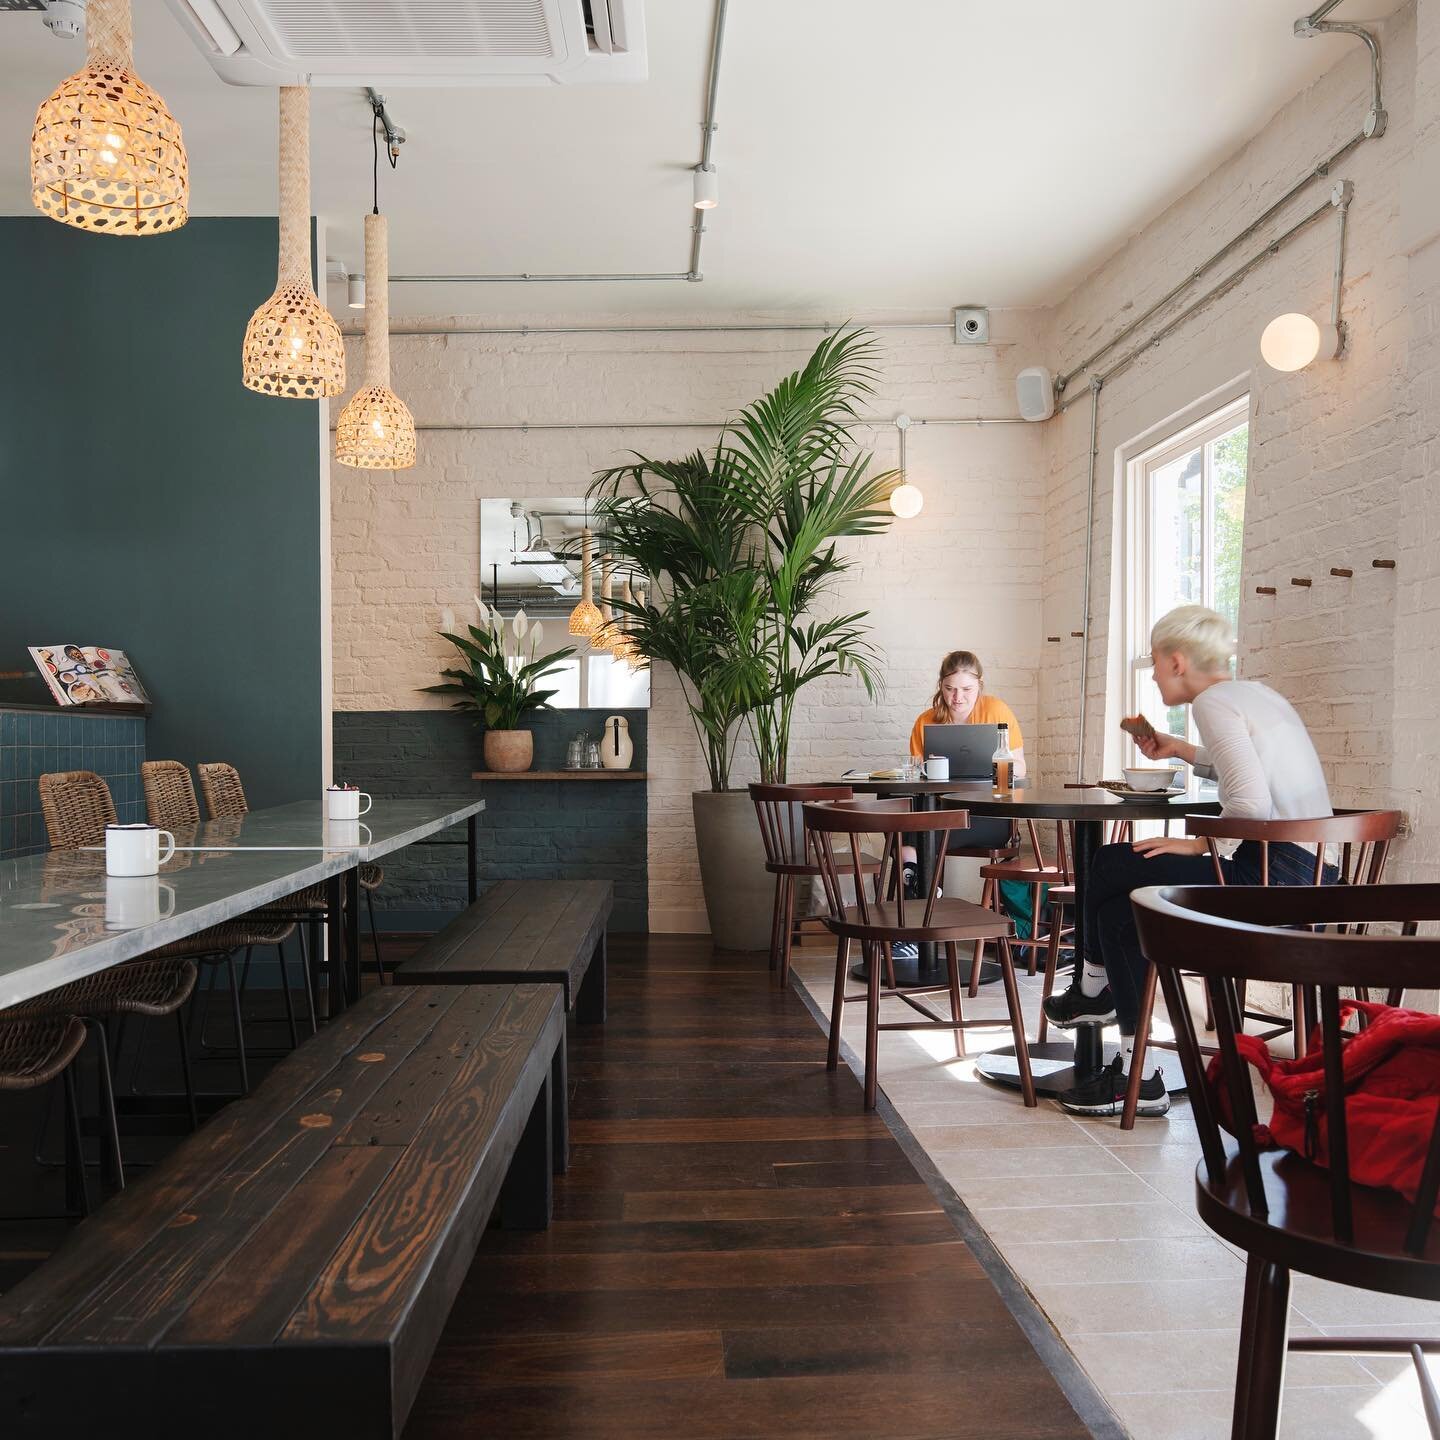 We loved working on this GAILS bakery in Kentish Town, London. Our zinc top tables with steel legs look like a great breakfast/work spot. 
*
*
#cafelife #shopfitting #cafeculture #therealwoodproject #zinctops #madeinbristol #metalwork #breakfastlondo